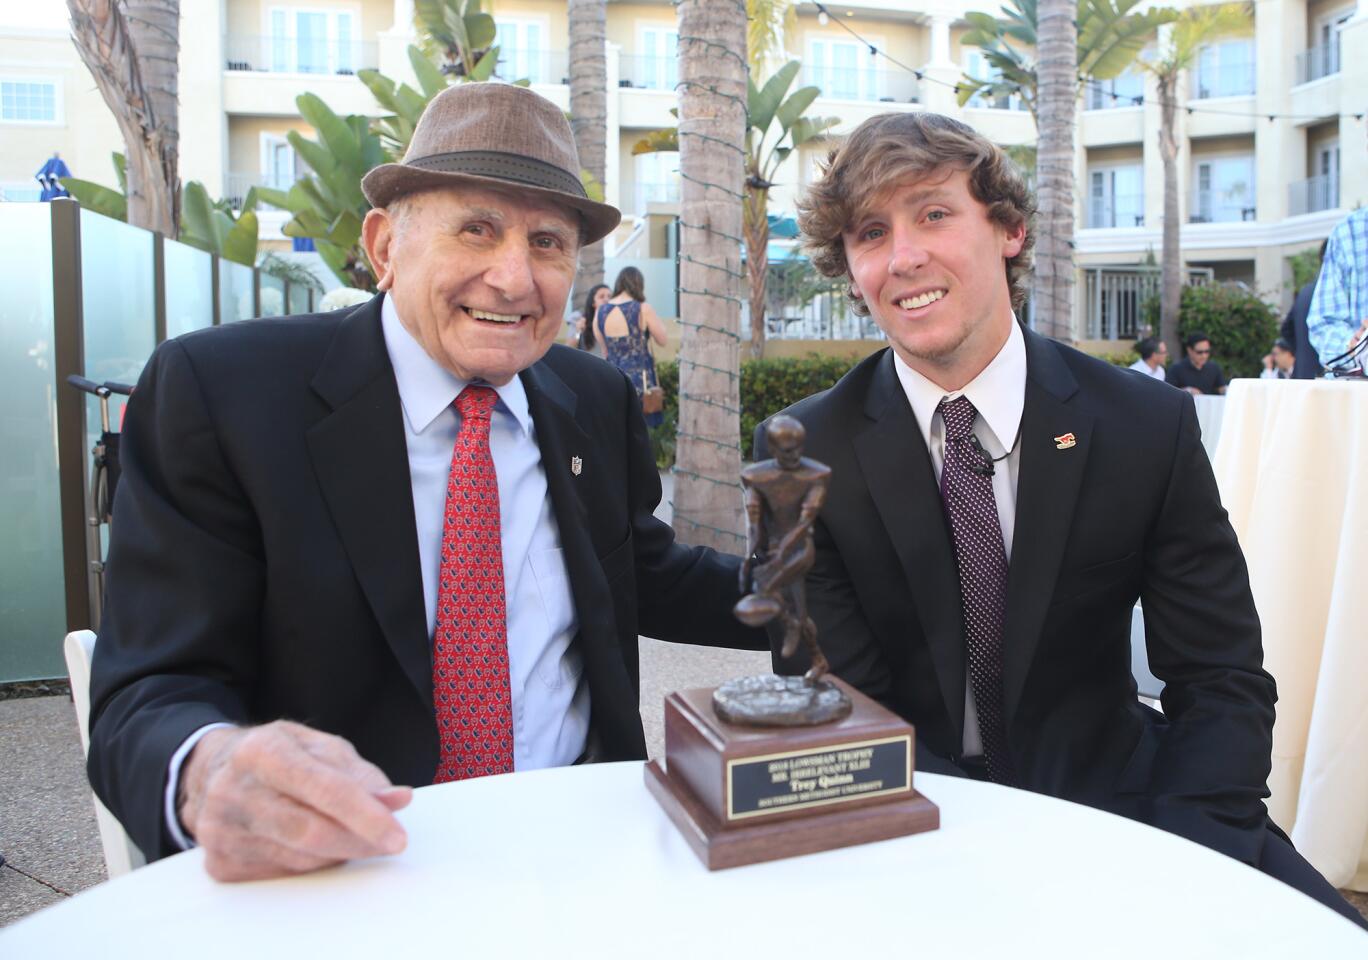 Mr. Irrelevant founder Paul Salata shares a laugh with 2018 Mr. Irrelevant Trey Quinn over the Lowsman Trophy prior to the Lowsman Trophy Banquet at the Balboa Bay Resort on Monday.